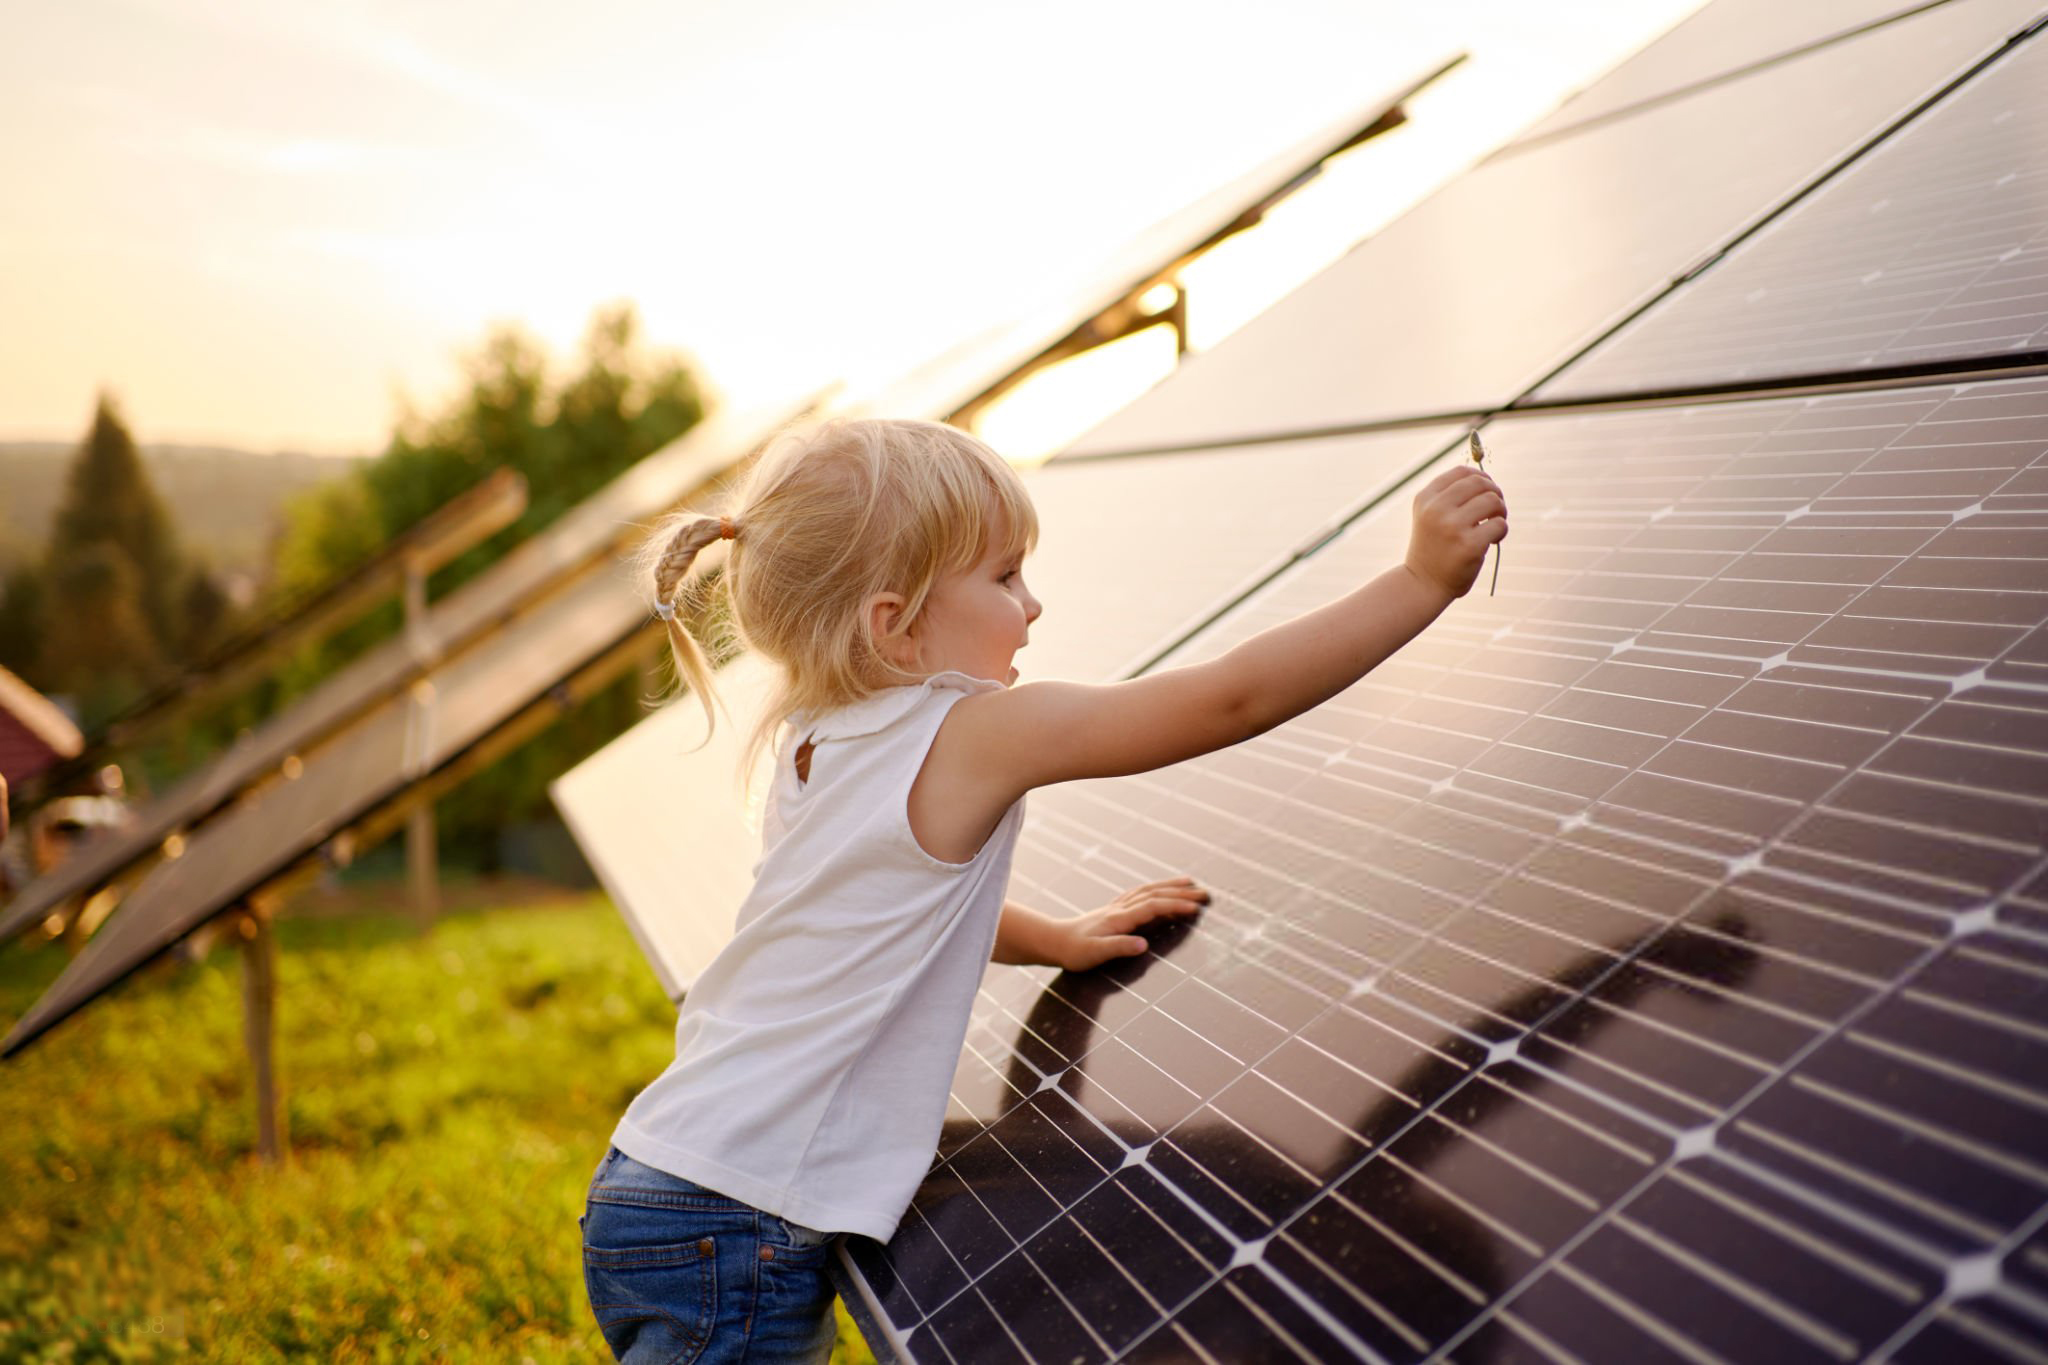 Portrait of young girl playing with grass and touching solar panel on sunset.